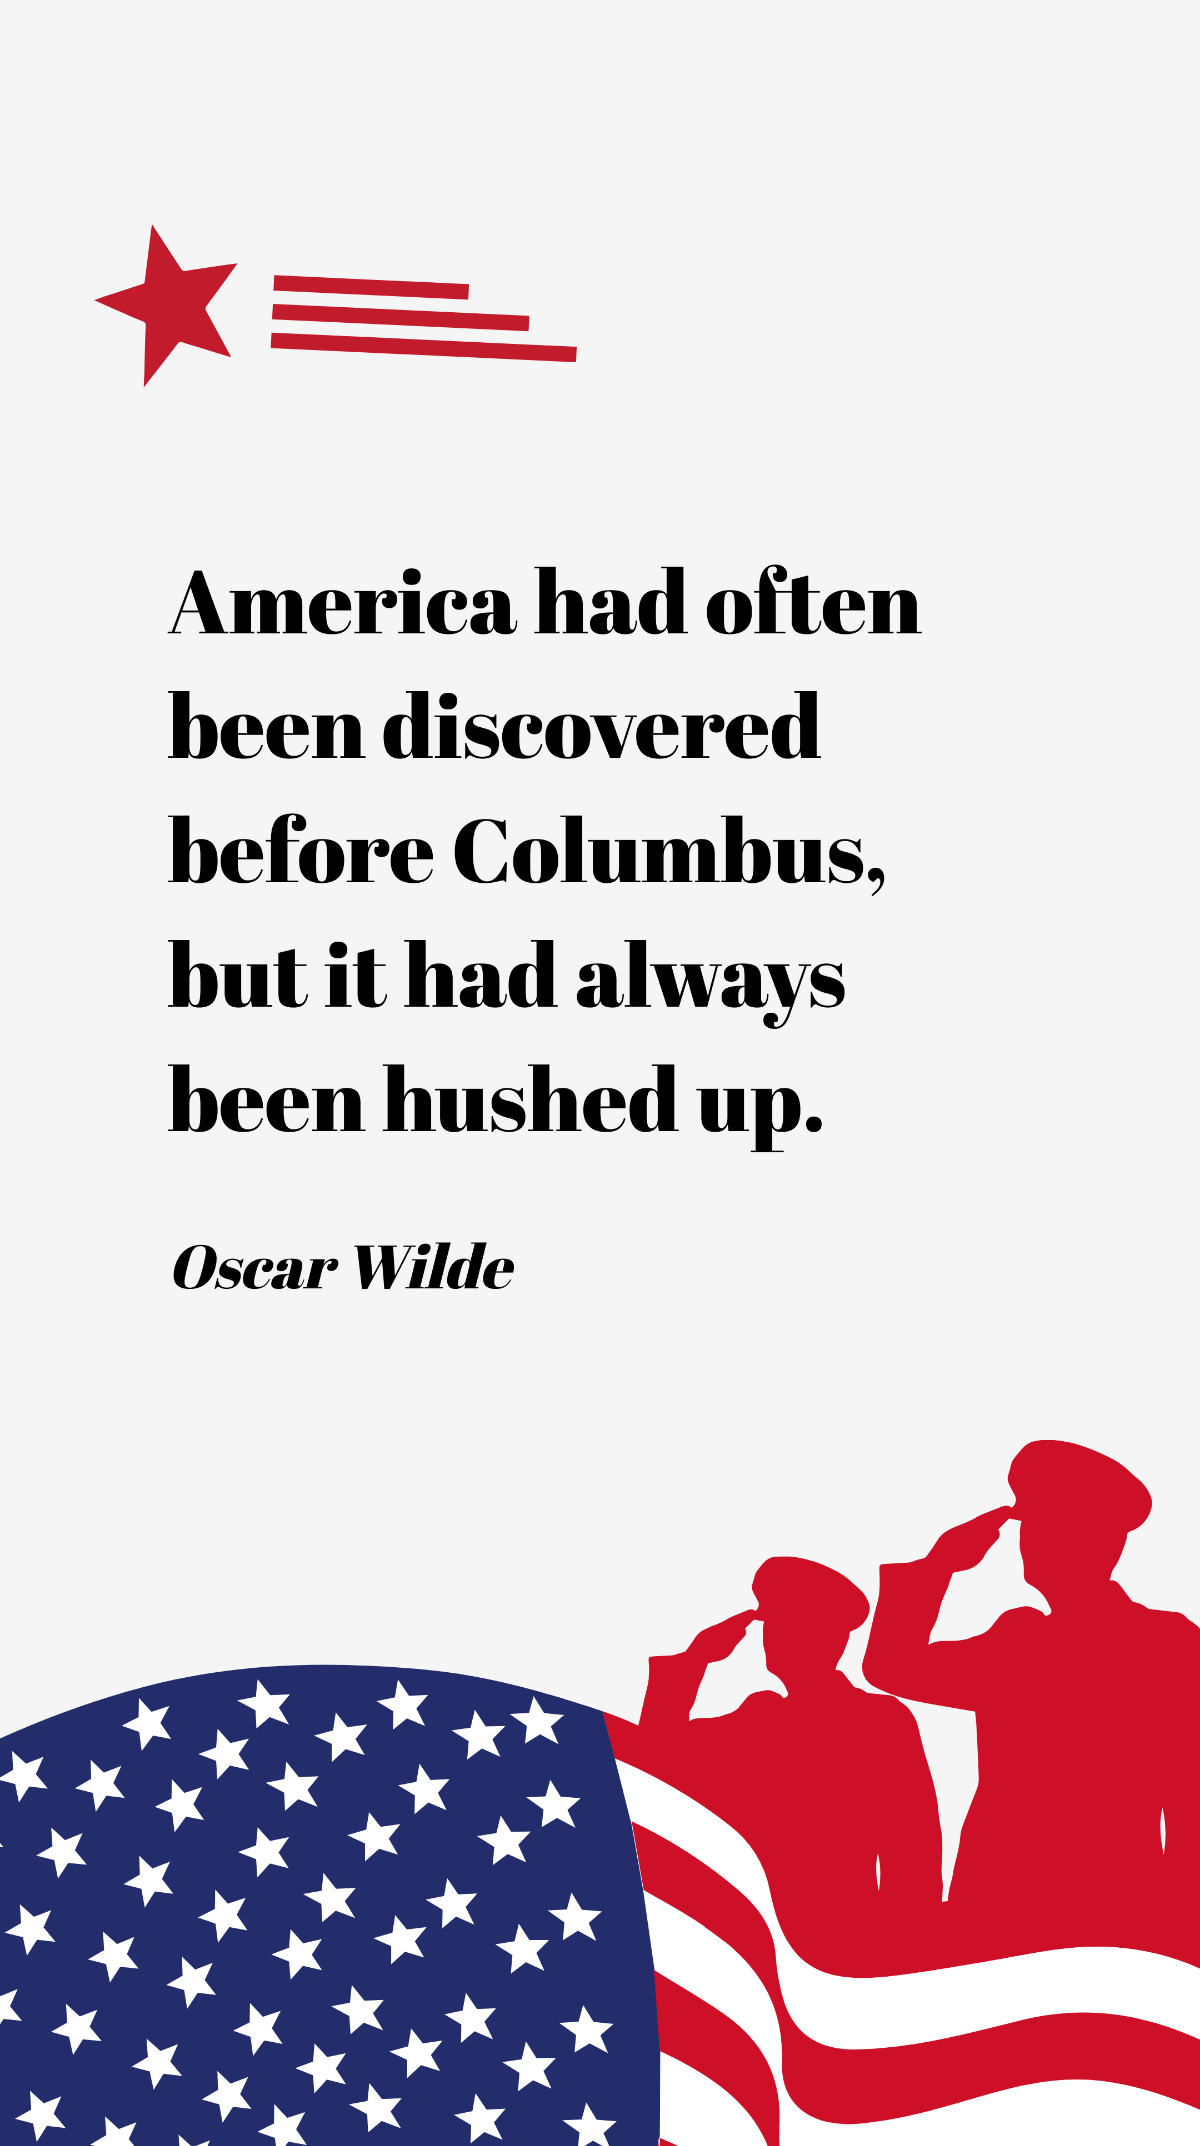 Oscar Wilde- America had often been discovered before Columbus, but it had always been hushed up. Template